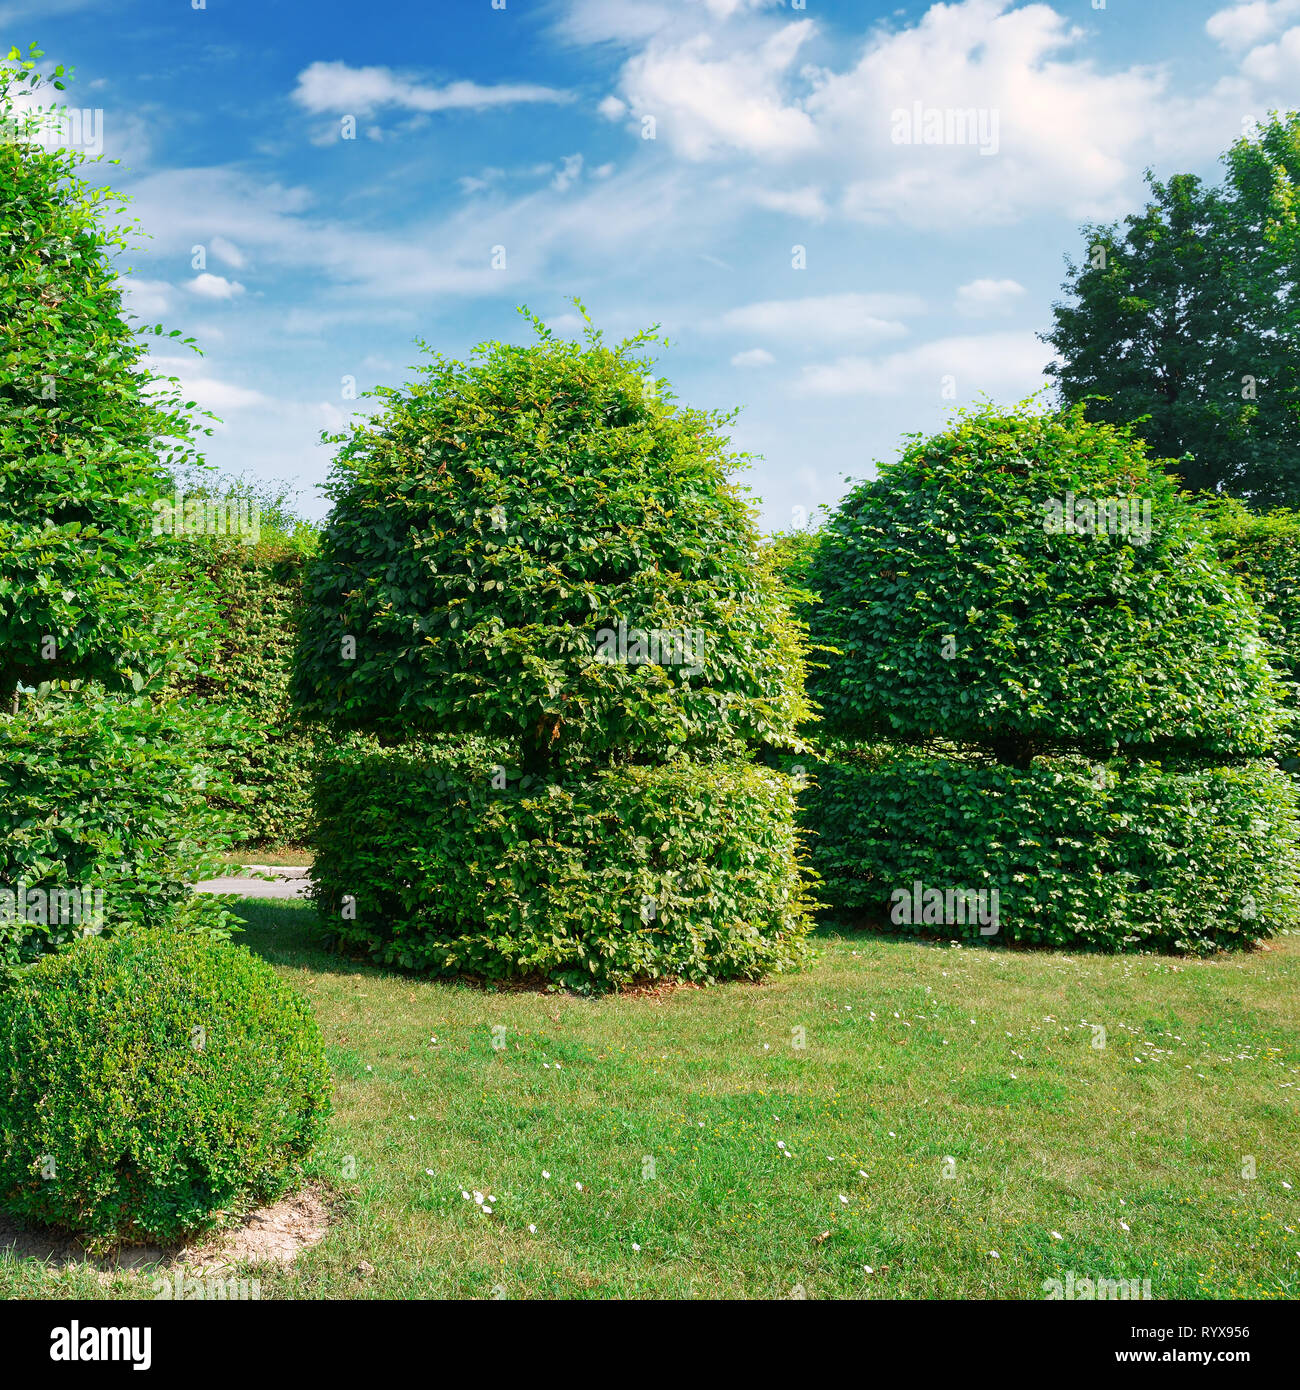 Hedges and ornamental shrub in a summer park. A bright sunny day. Stock Photo